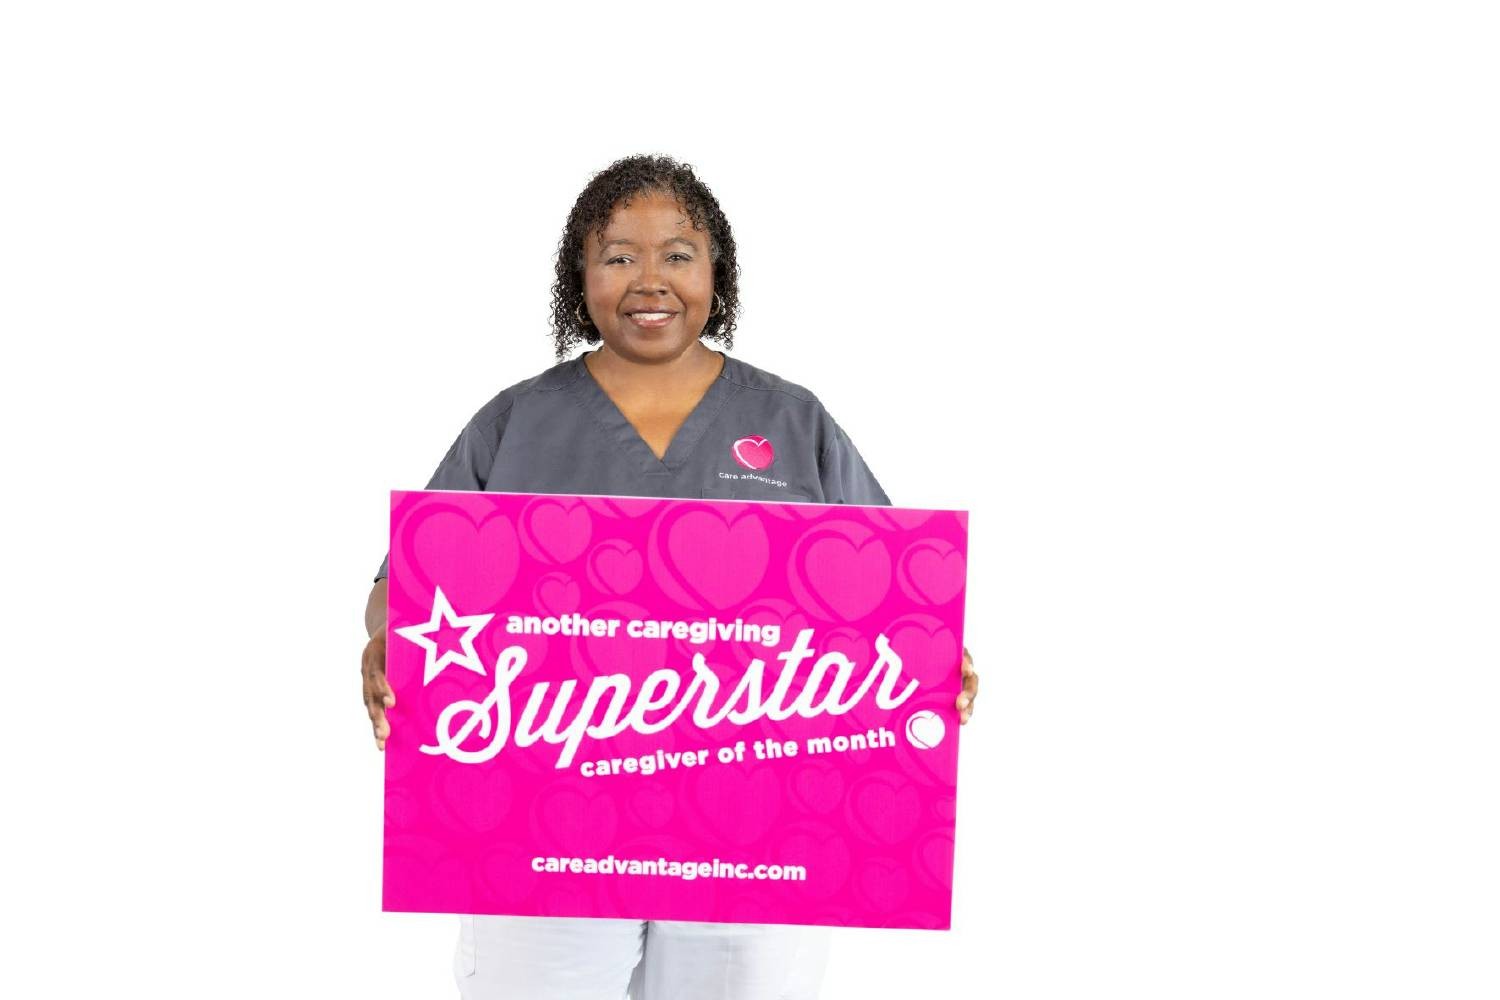 Germaine Oliver, caregiver 30+ years of service.